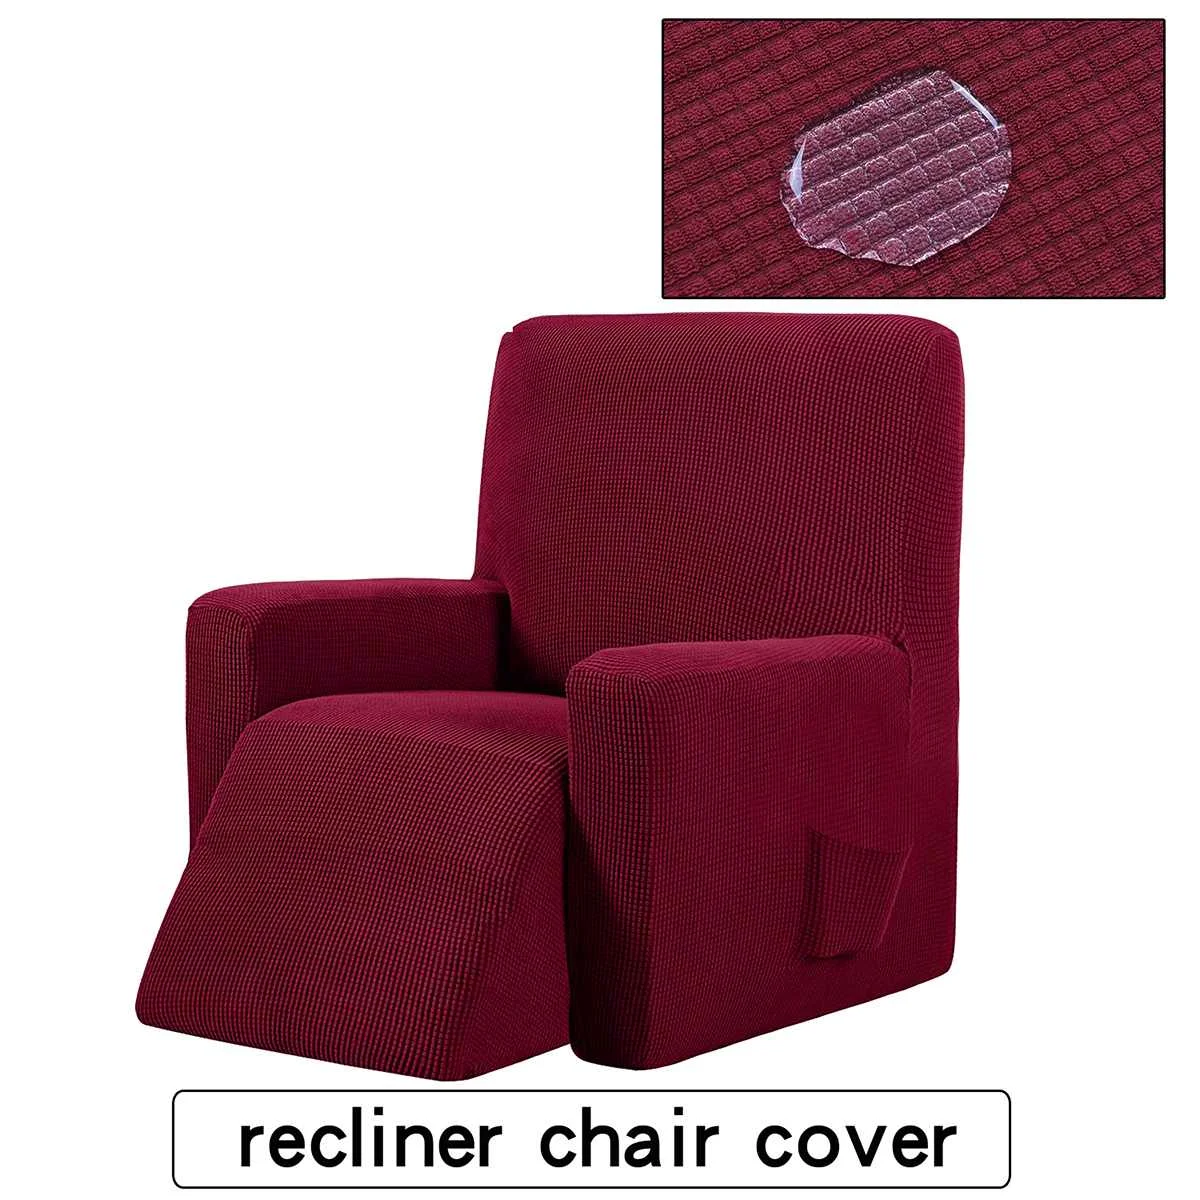 Recliner Couch Cover All-inclusive Sofa Cover Elasticity Stretch Anti-slip Furniture Slipcovers Chair Protector Single Seat Sofa - Цвет: Бургундия